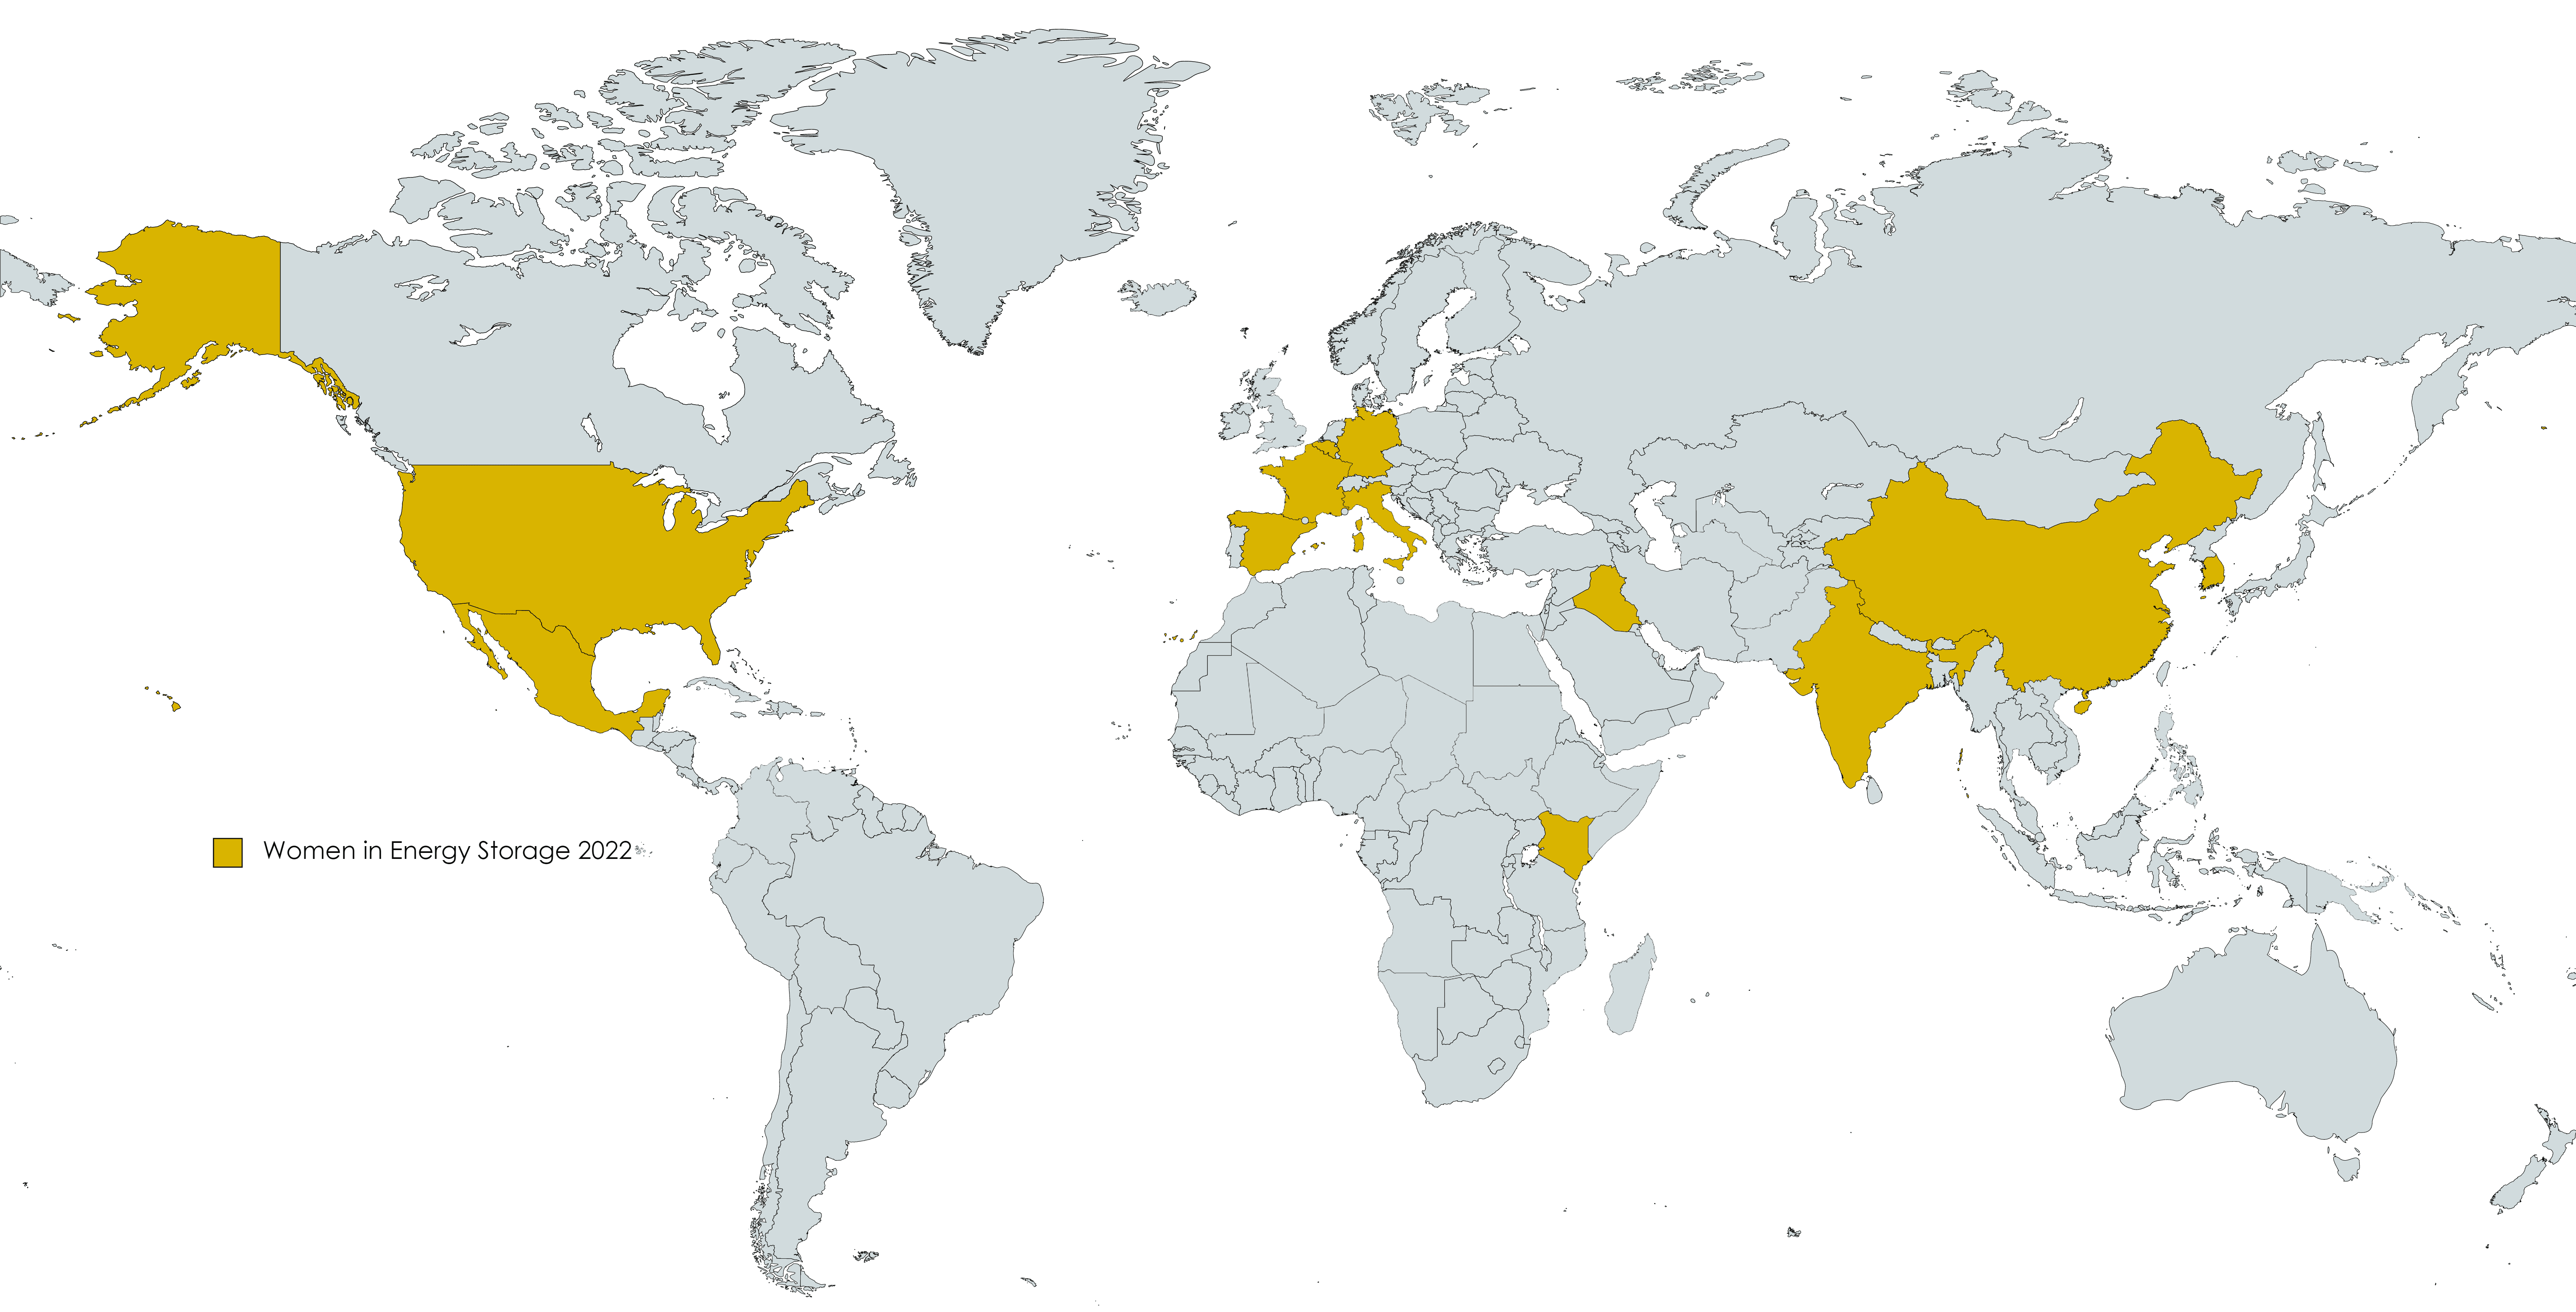 Map of the world with women in energy storage mentor countries highlighted in yellow